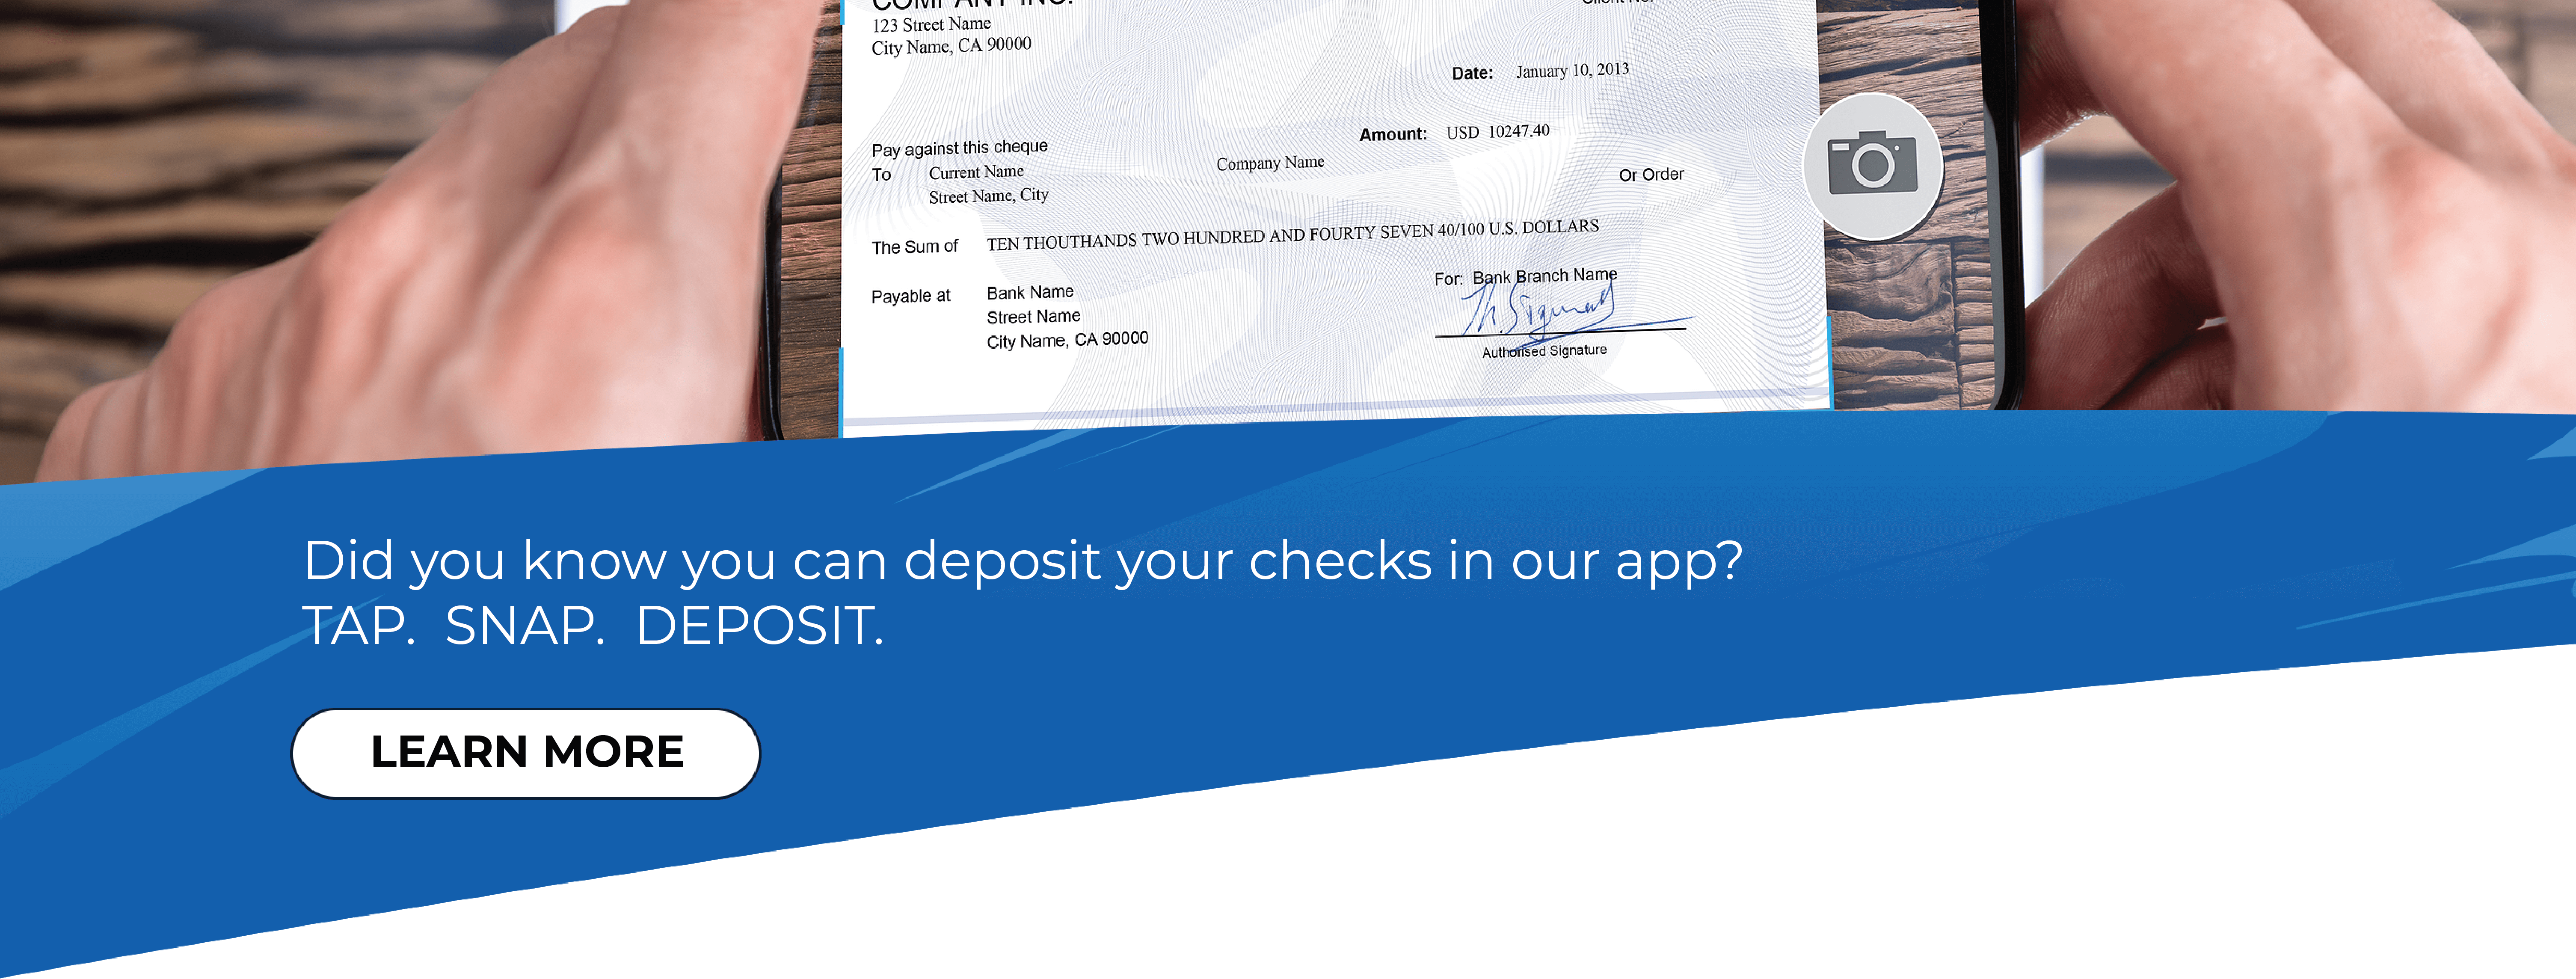 Download our app to use mobile deposit